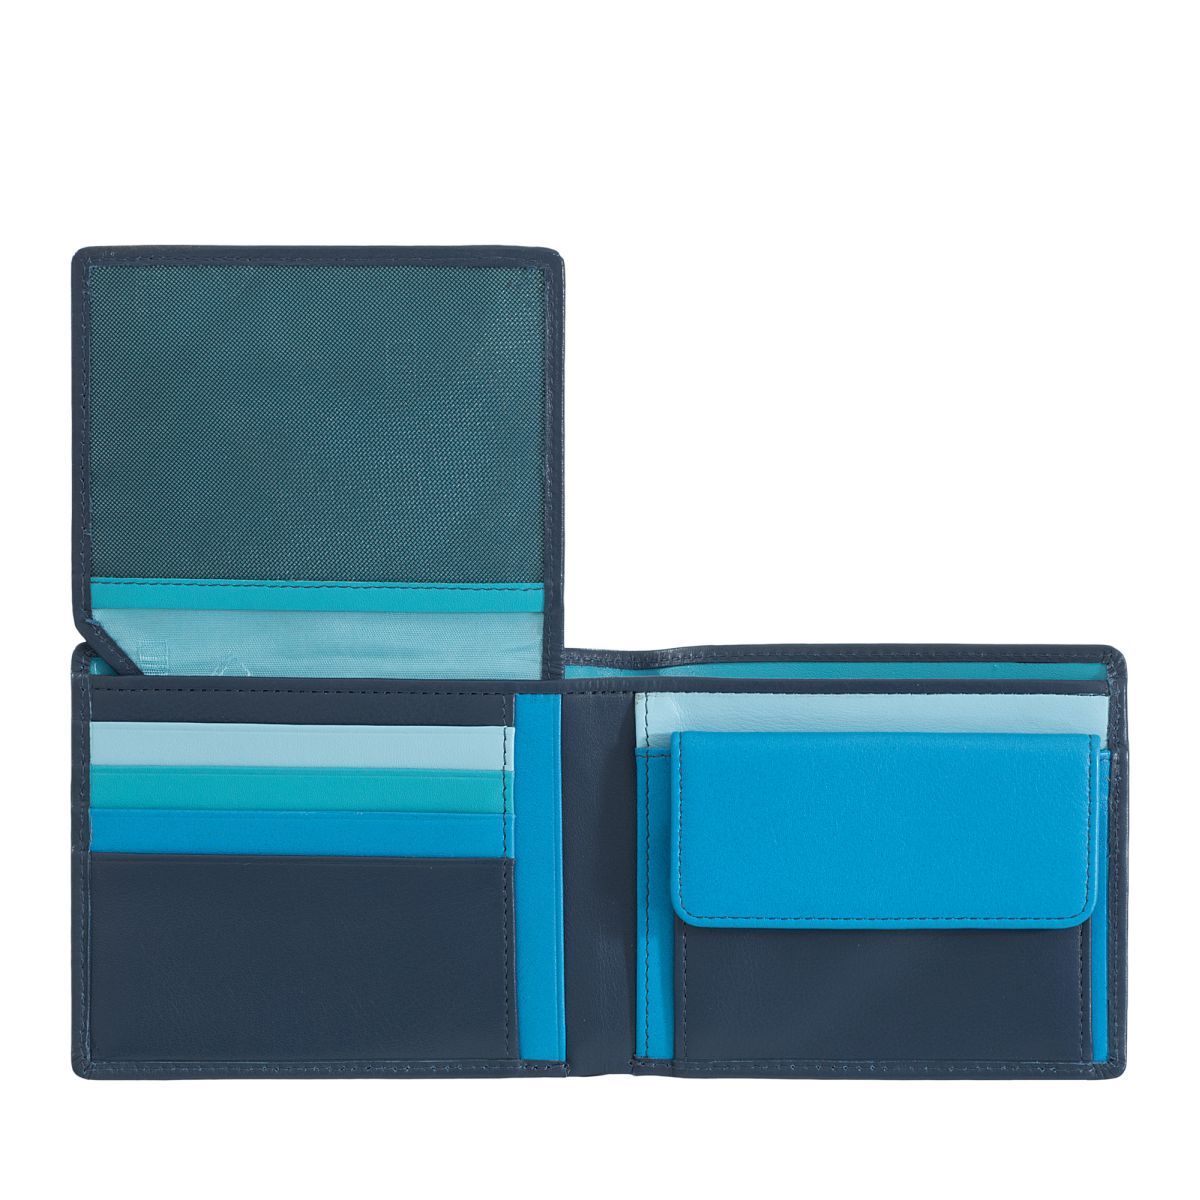 DuDu Leather classic multi color wallet with coin purse and inside flap - Blue